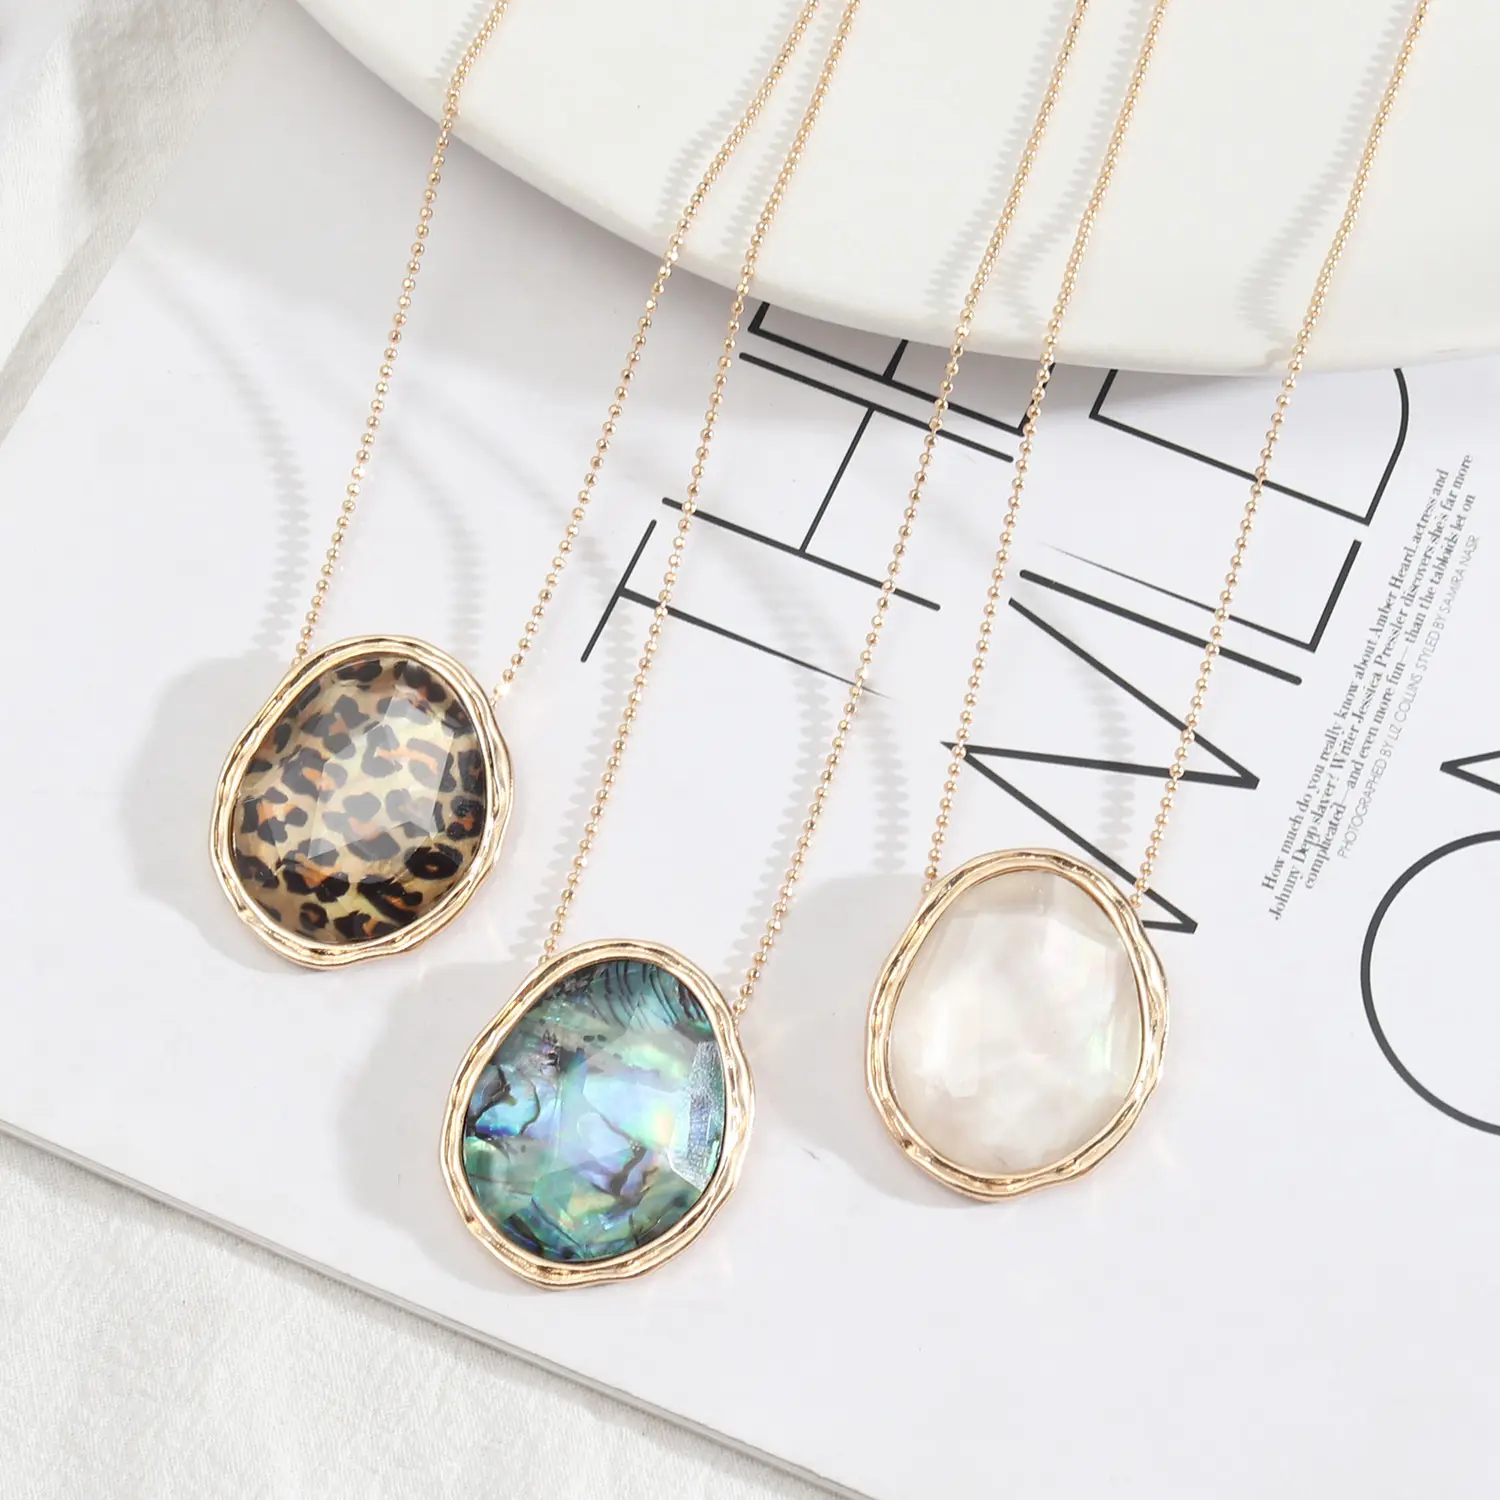 2021 New Fashion Personalized Leopard Print Abalone Shell Necklaces Jewelry For Women Trendy Pearl Gemstone Geometric Necklace